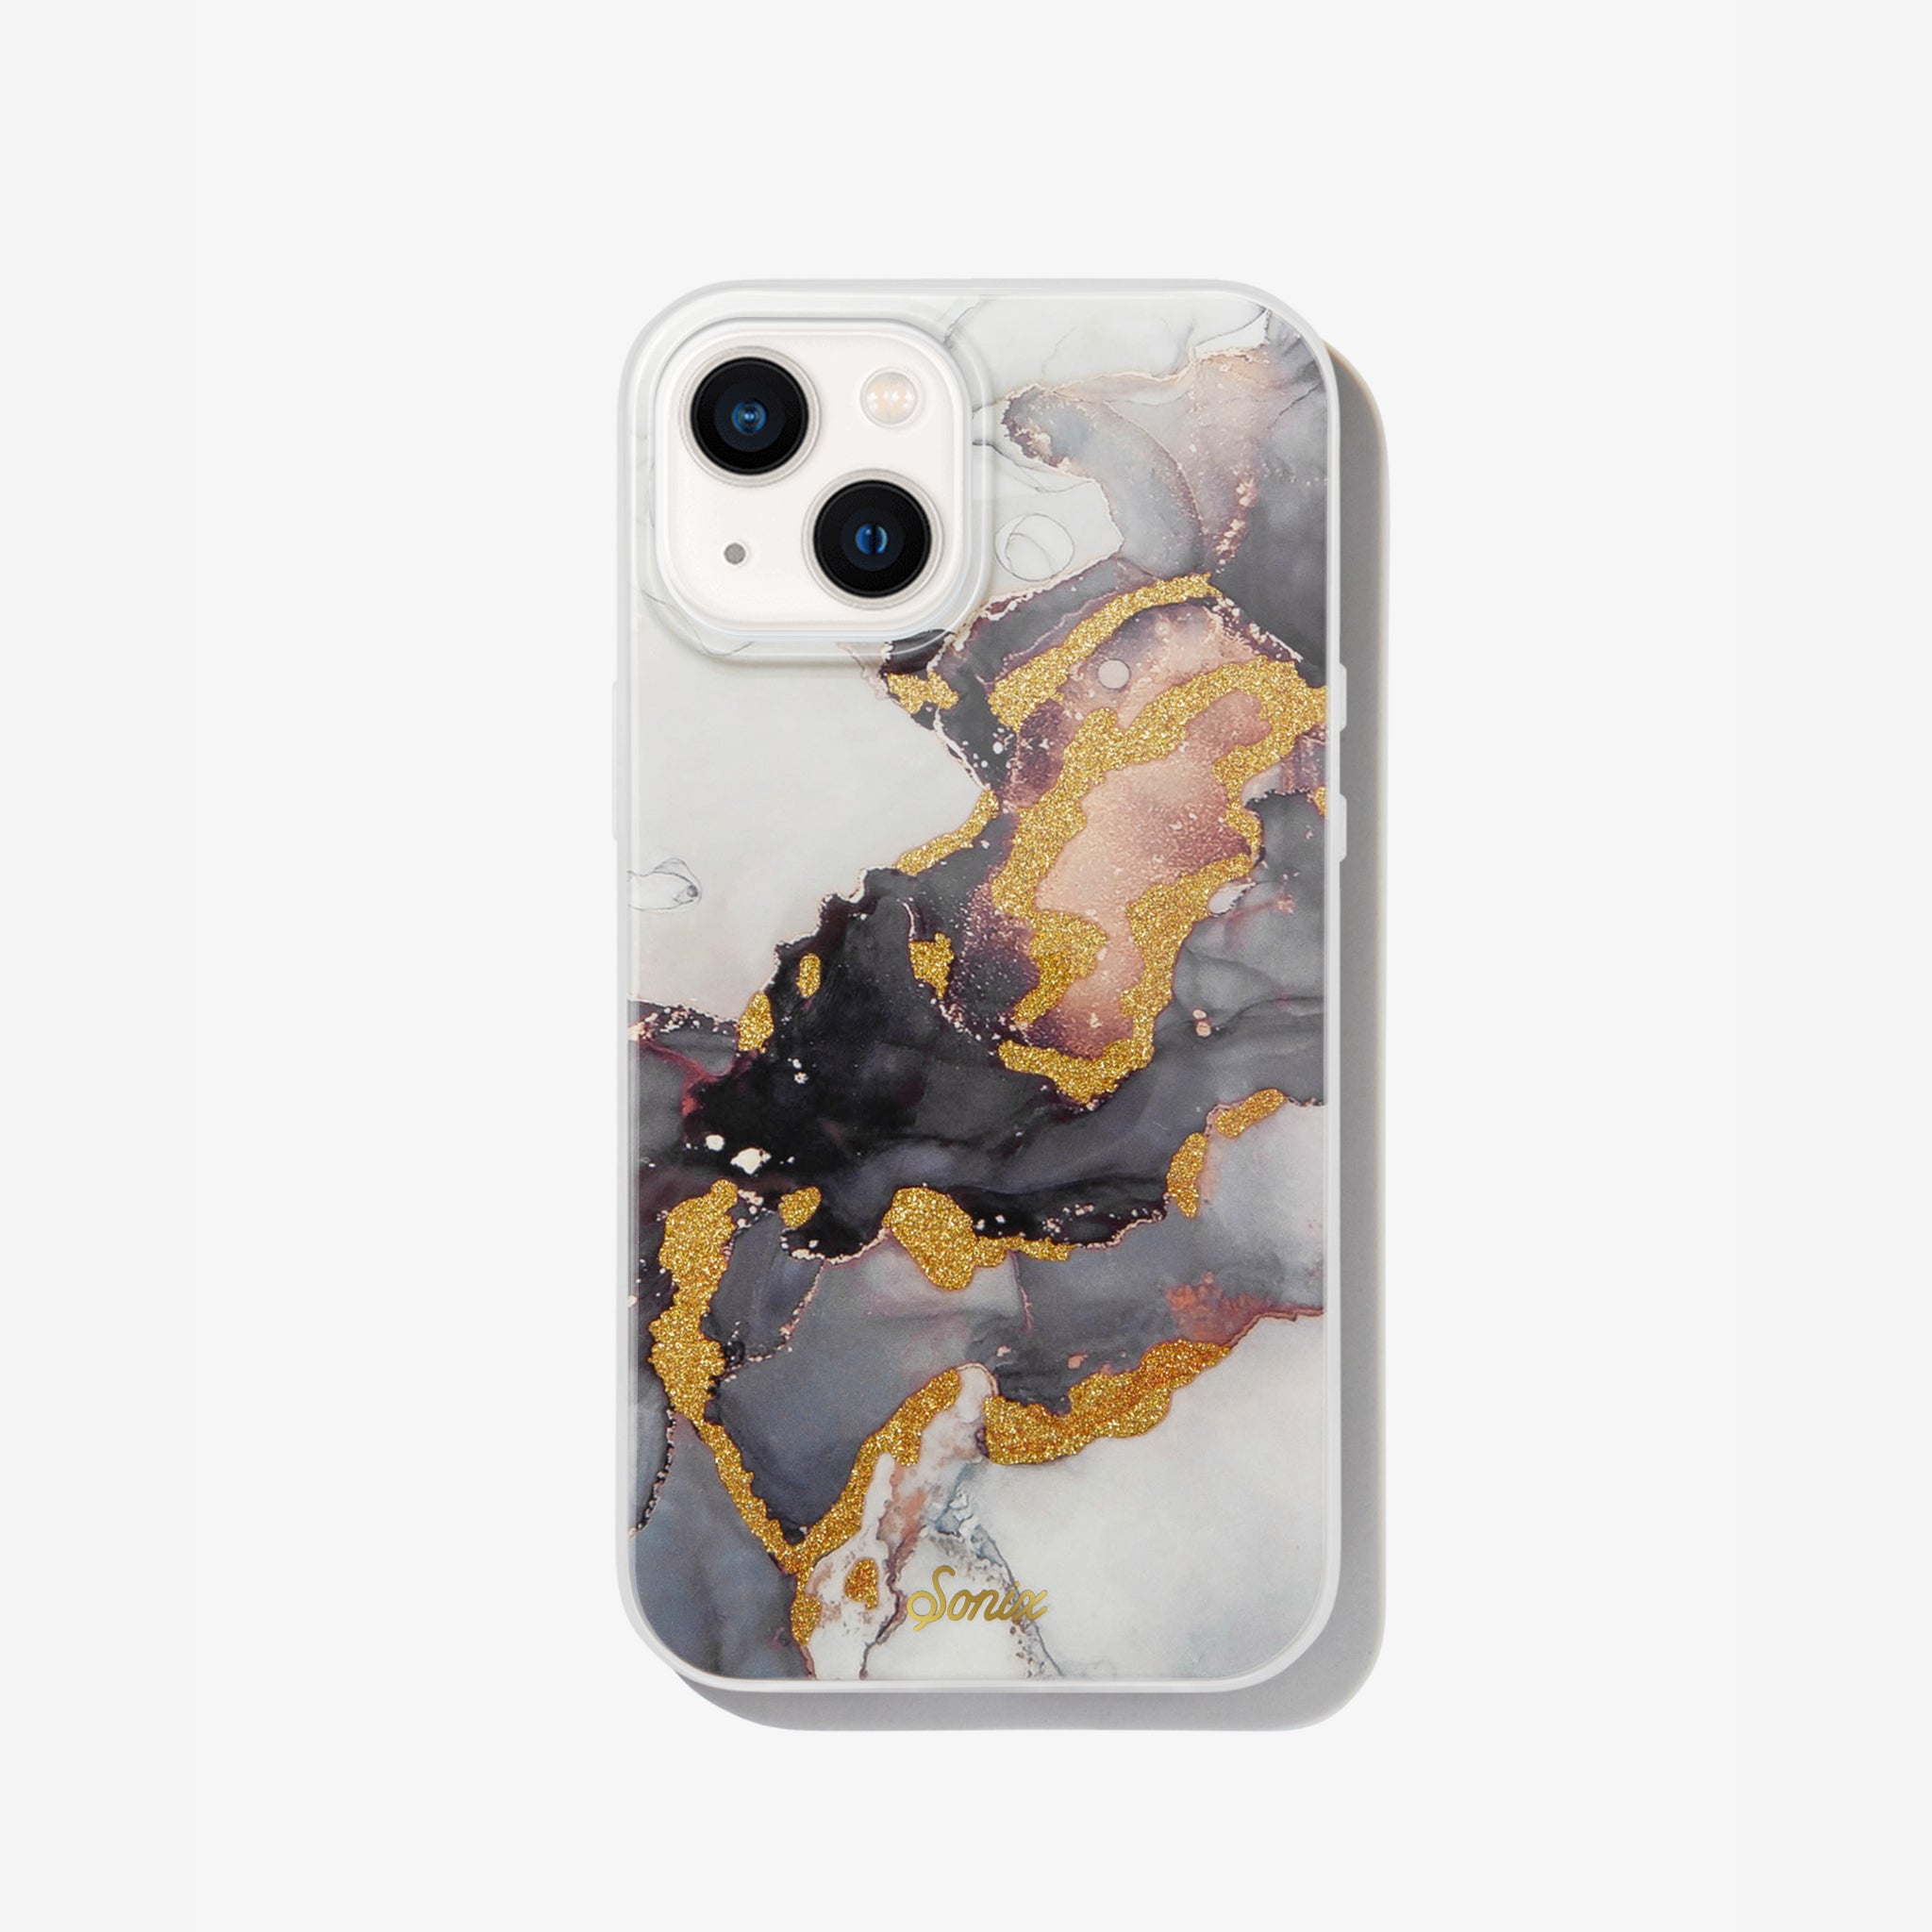 an intergalactic purple and dark colored design with gold glitter to bring out-of-this-world elements shown on an iphone 13